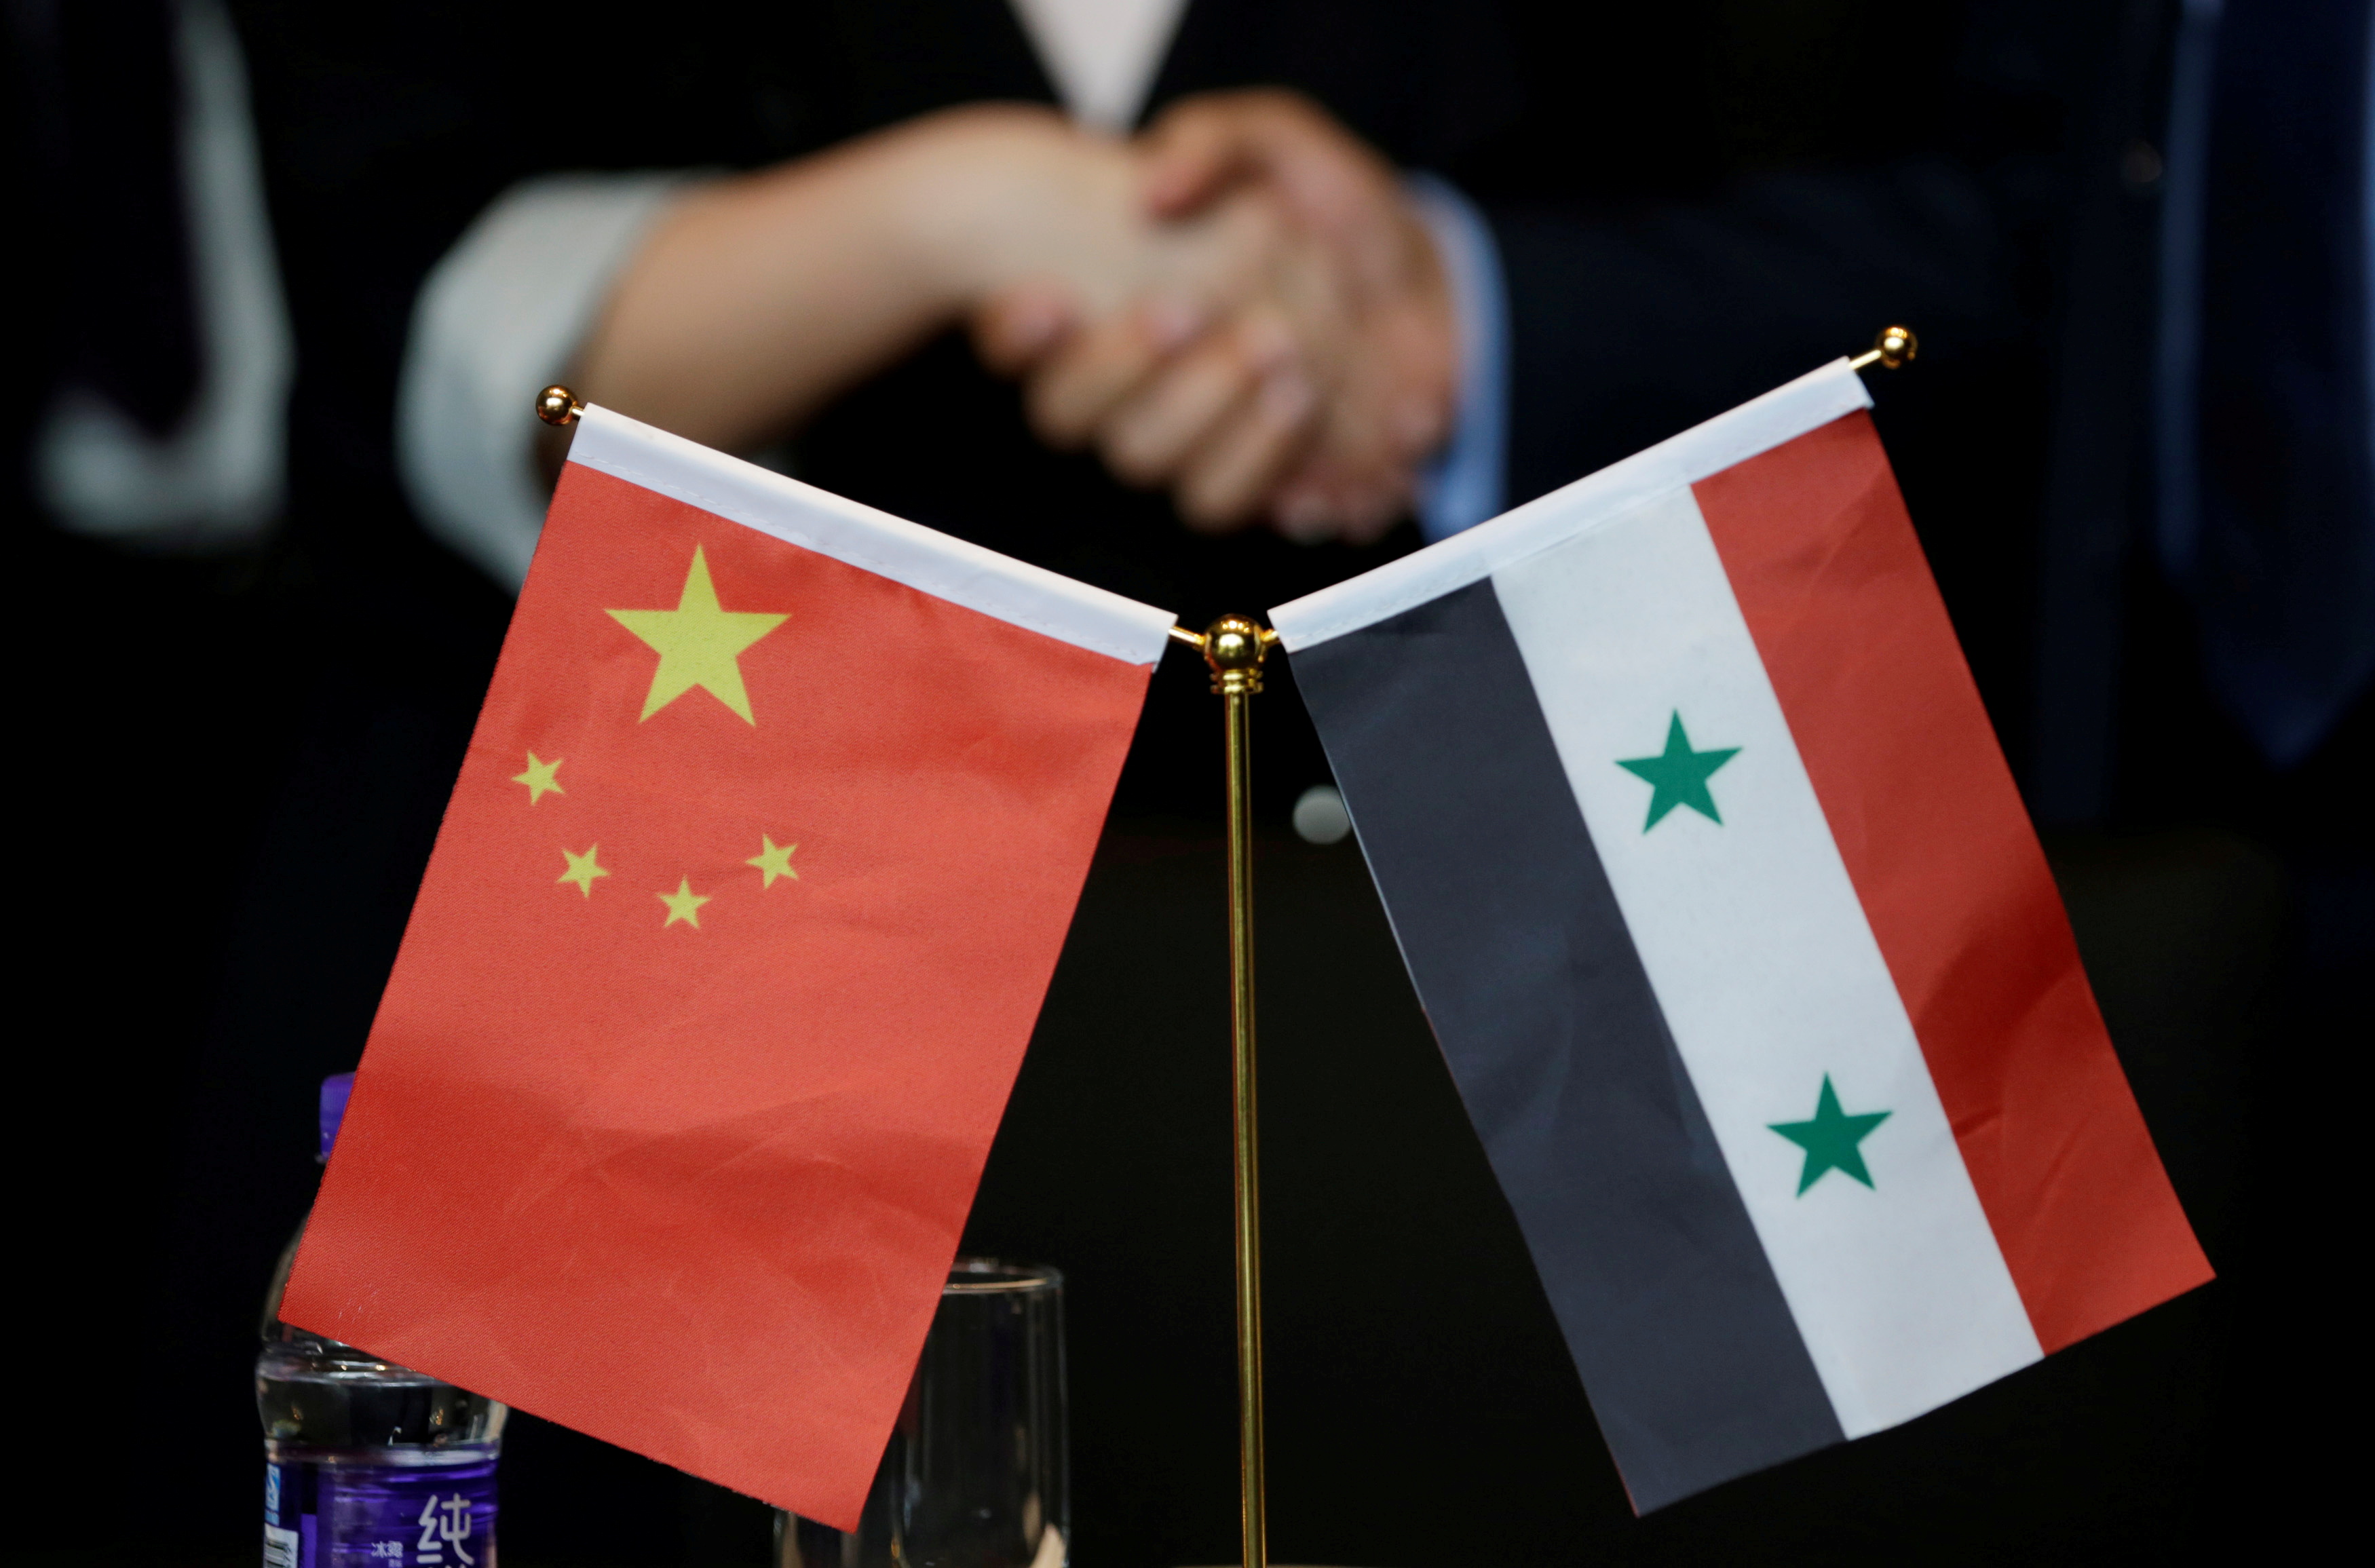 Chinese and Syrian businessmen shake hands behind their national flags in Beijing